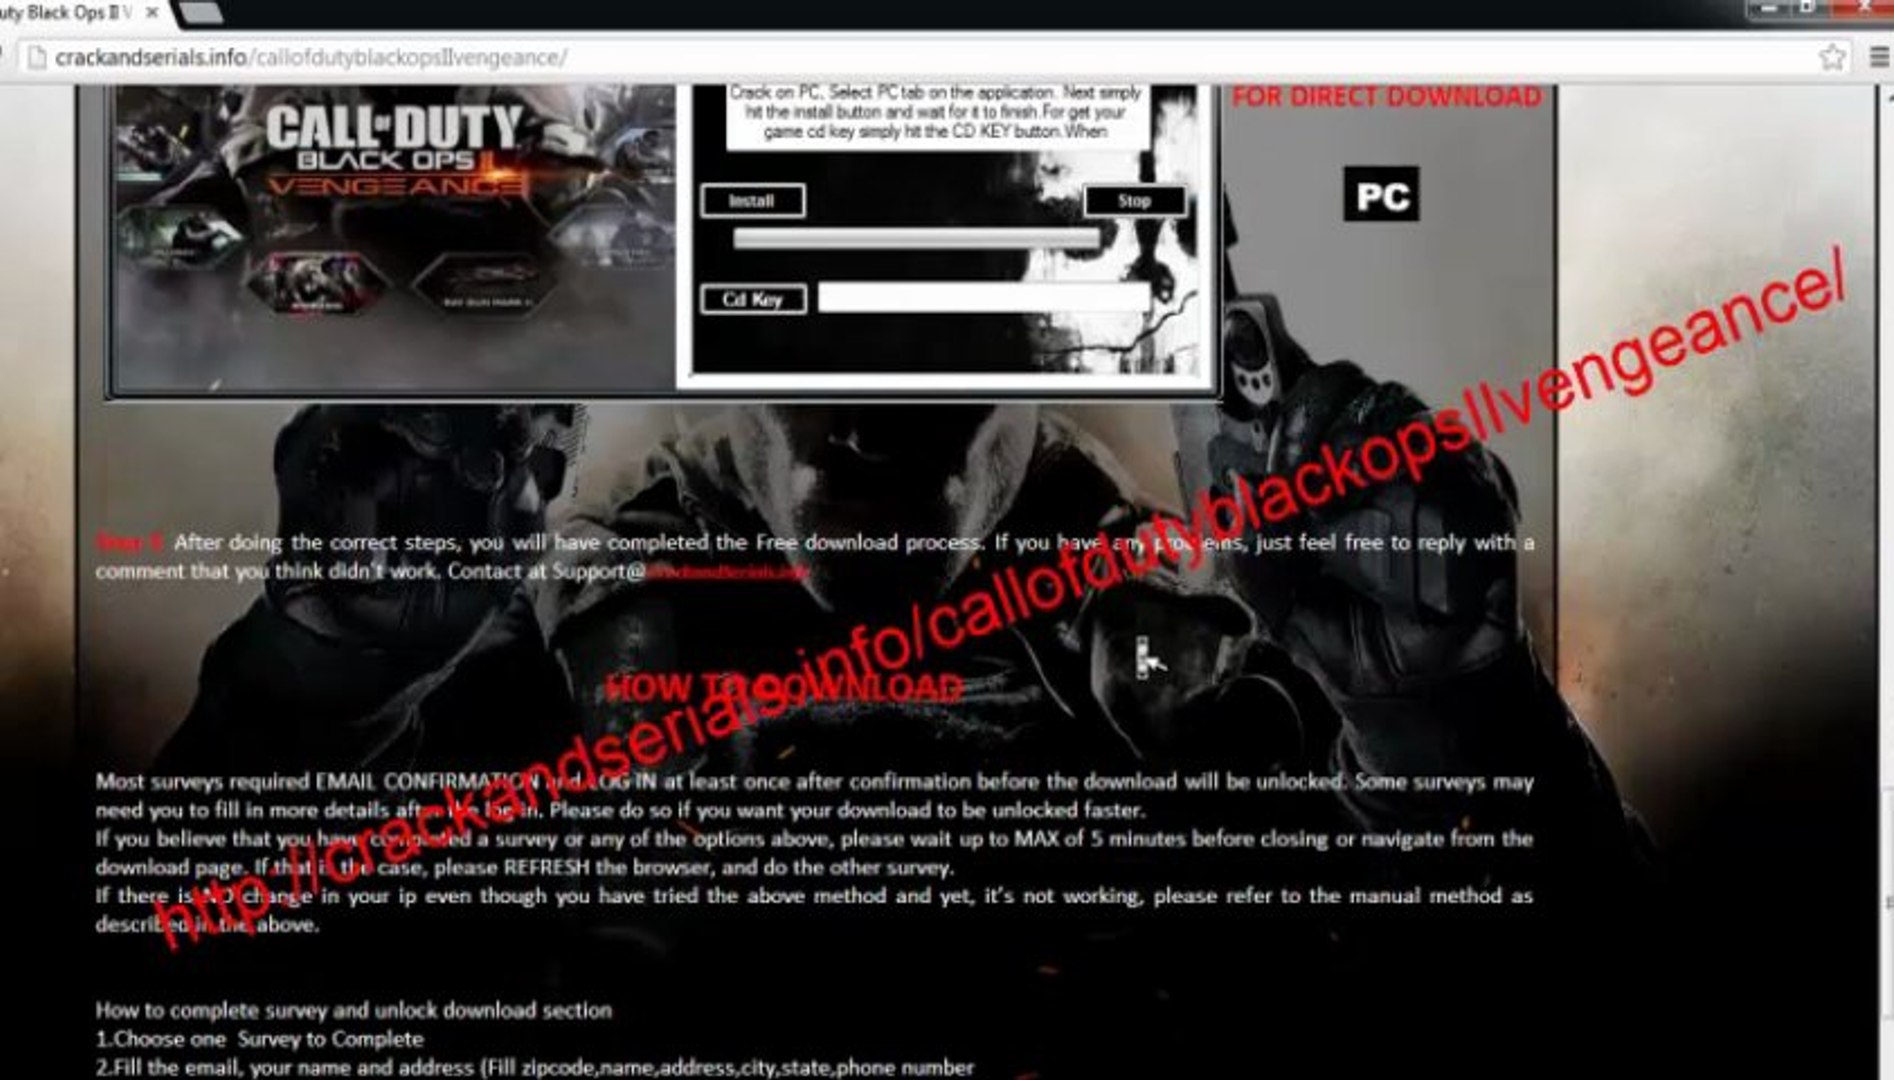 call of duty black ops II vengeance[DOWNLOAD](PC,PS3,XBOX360)[Crack][Keygen][FIX]  - video Dailymotion